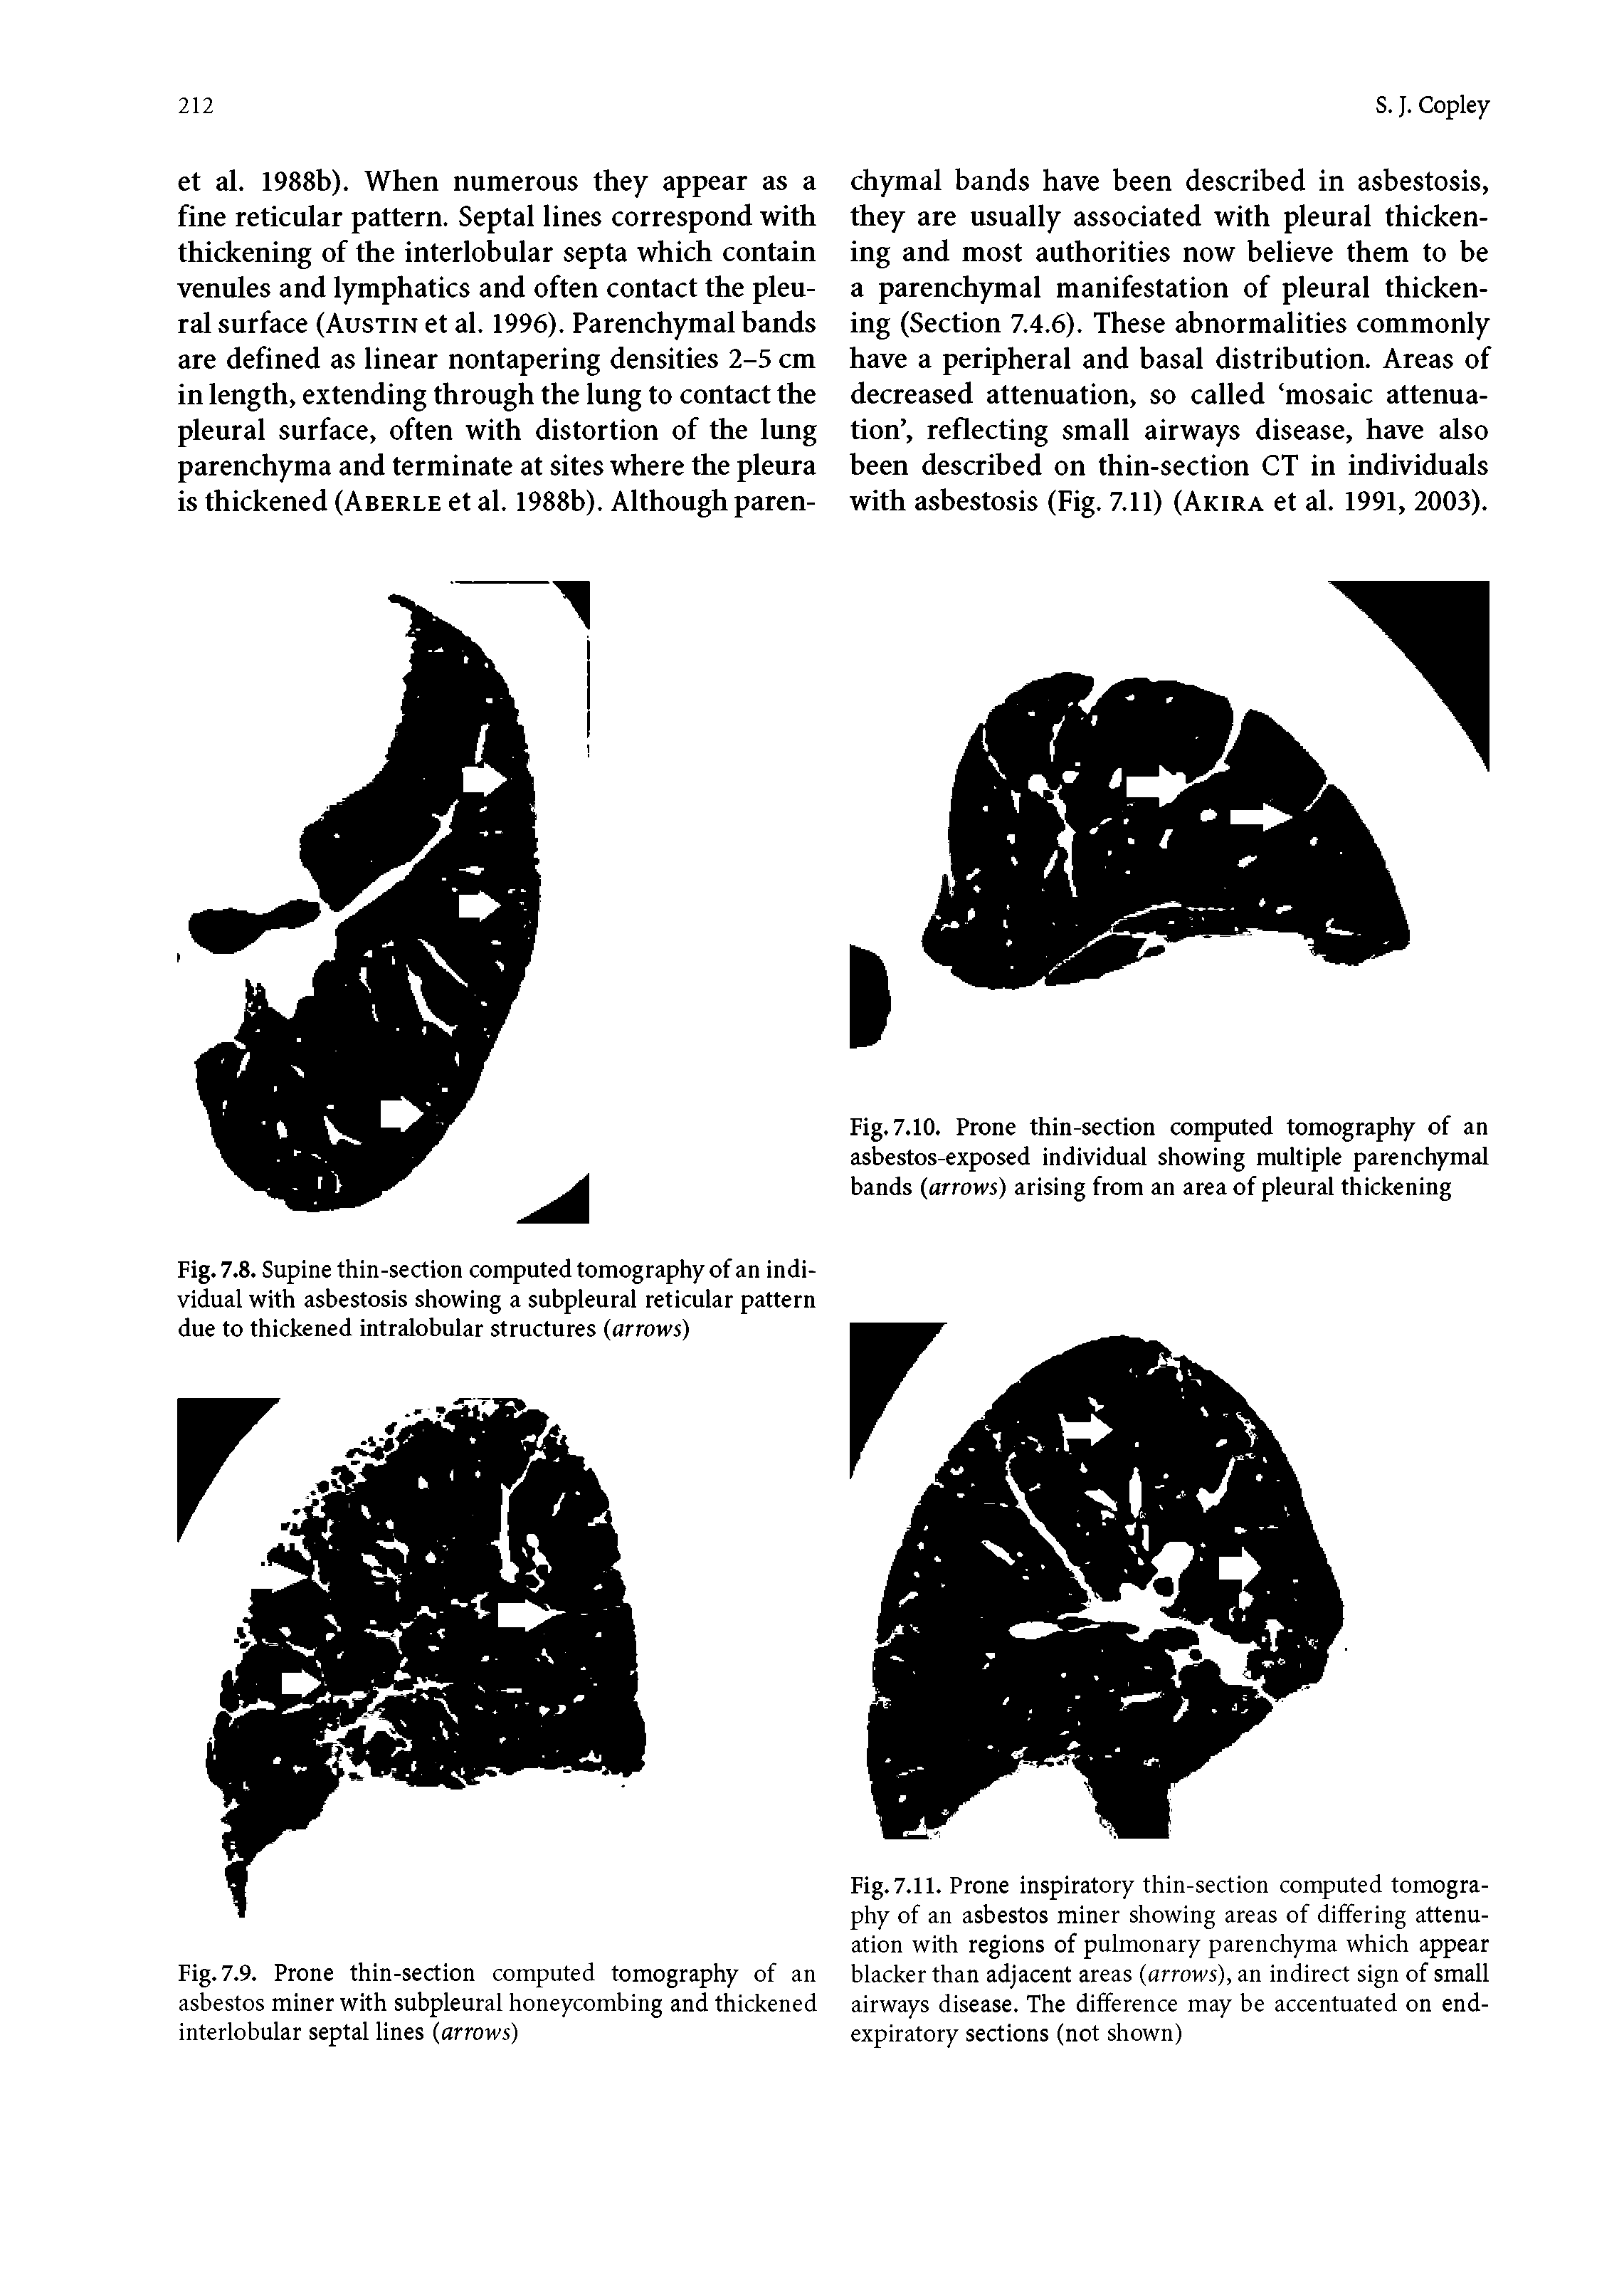 Fig. 7.11. Prone inspiratory thin-section computed tomography of an asbestos miner showing areas of differing attenuation with regions of pulmonary parenchyma which appear blacker than adjacent areas (arrows), an indirect sign of small airways disease. The difference may be accentuated on end-expiratory sections (not shown)...